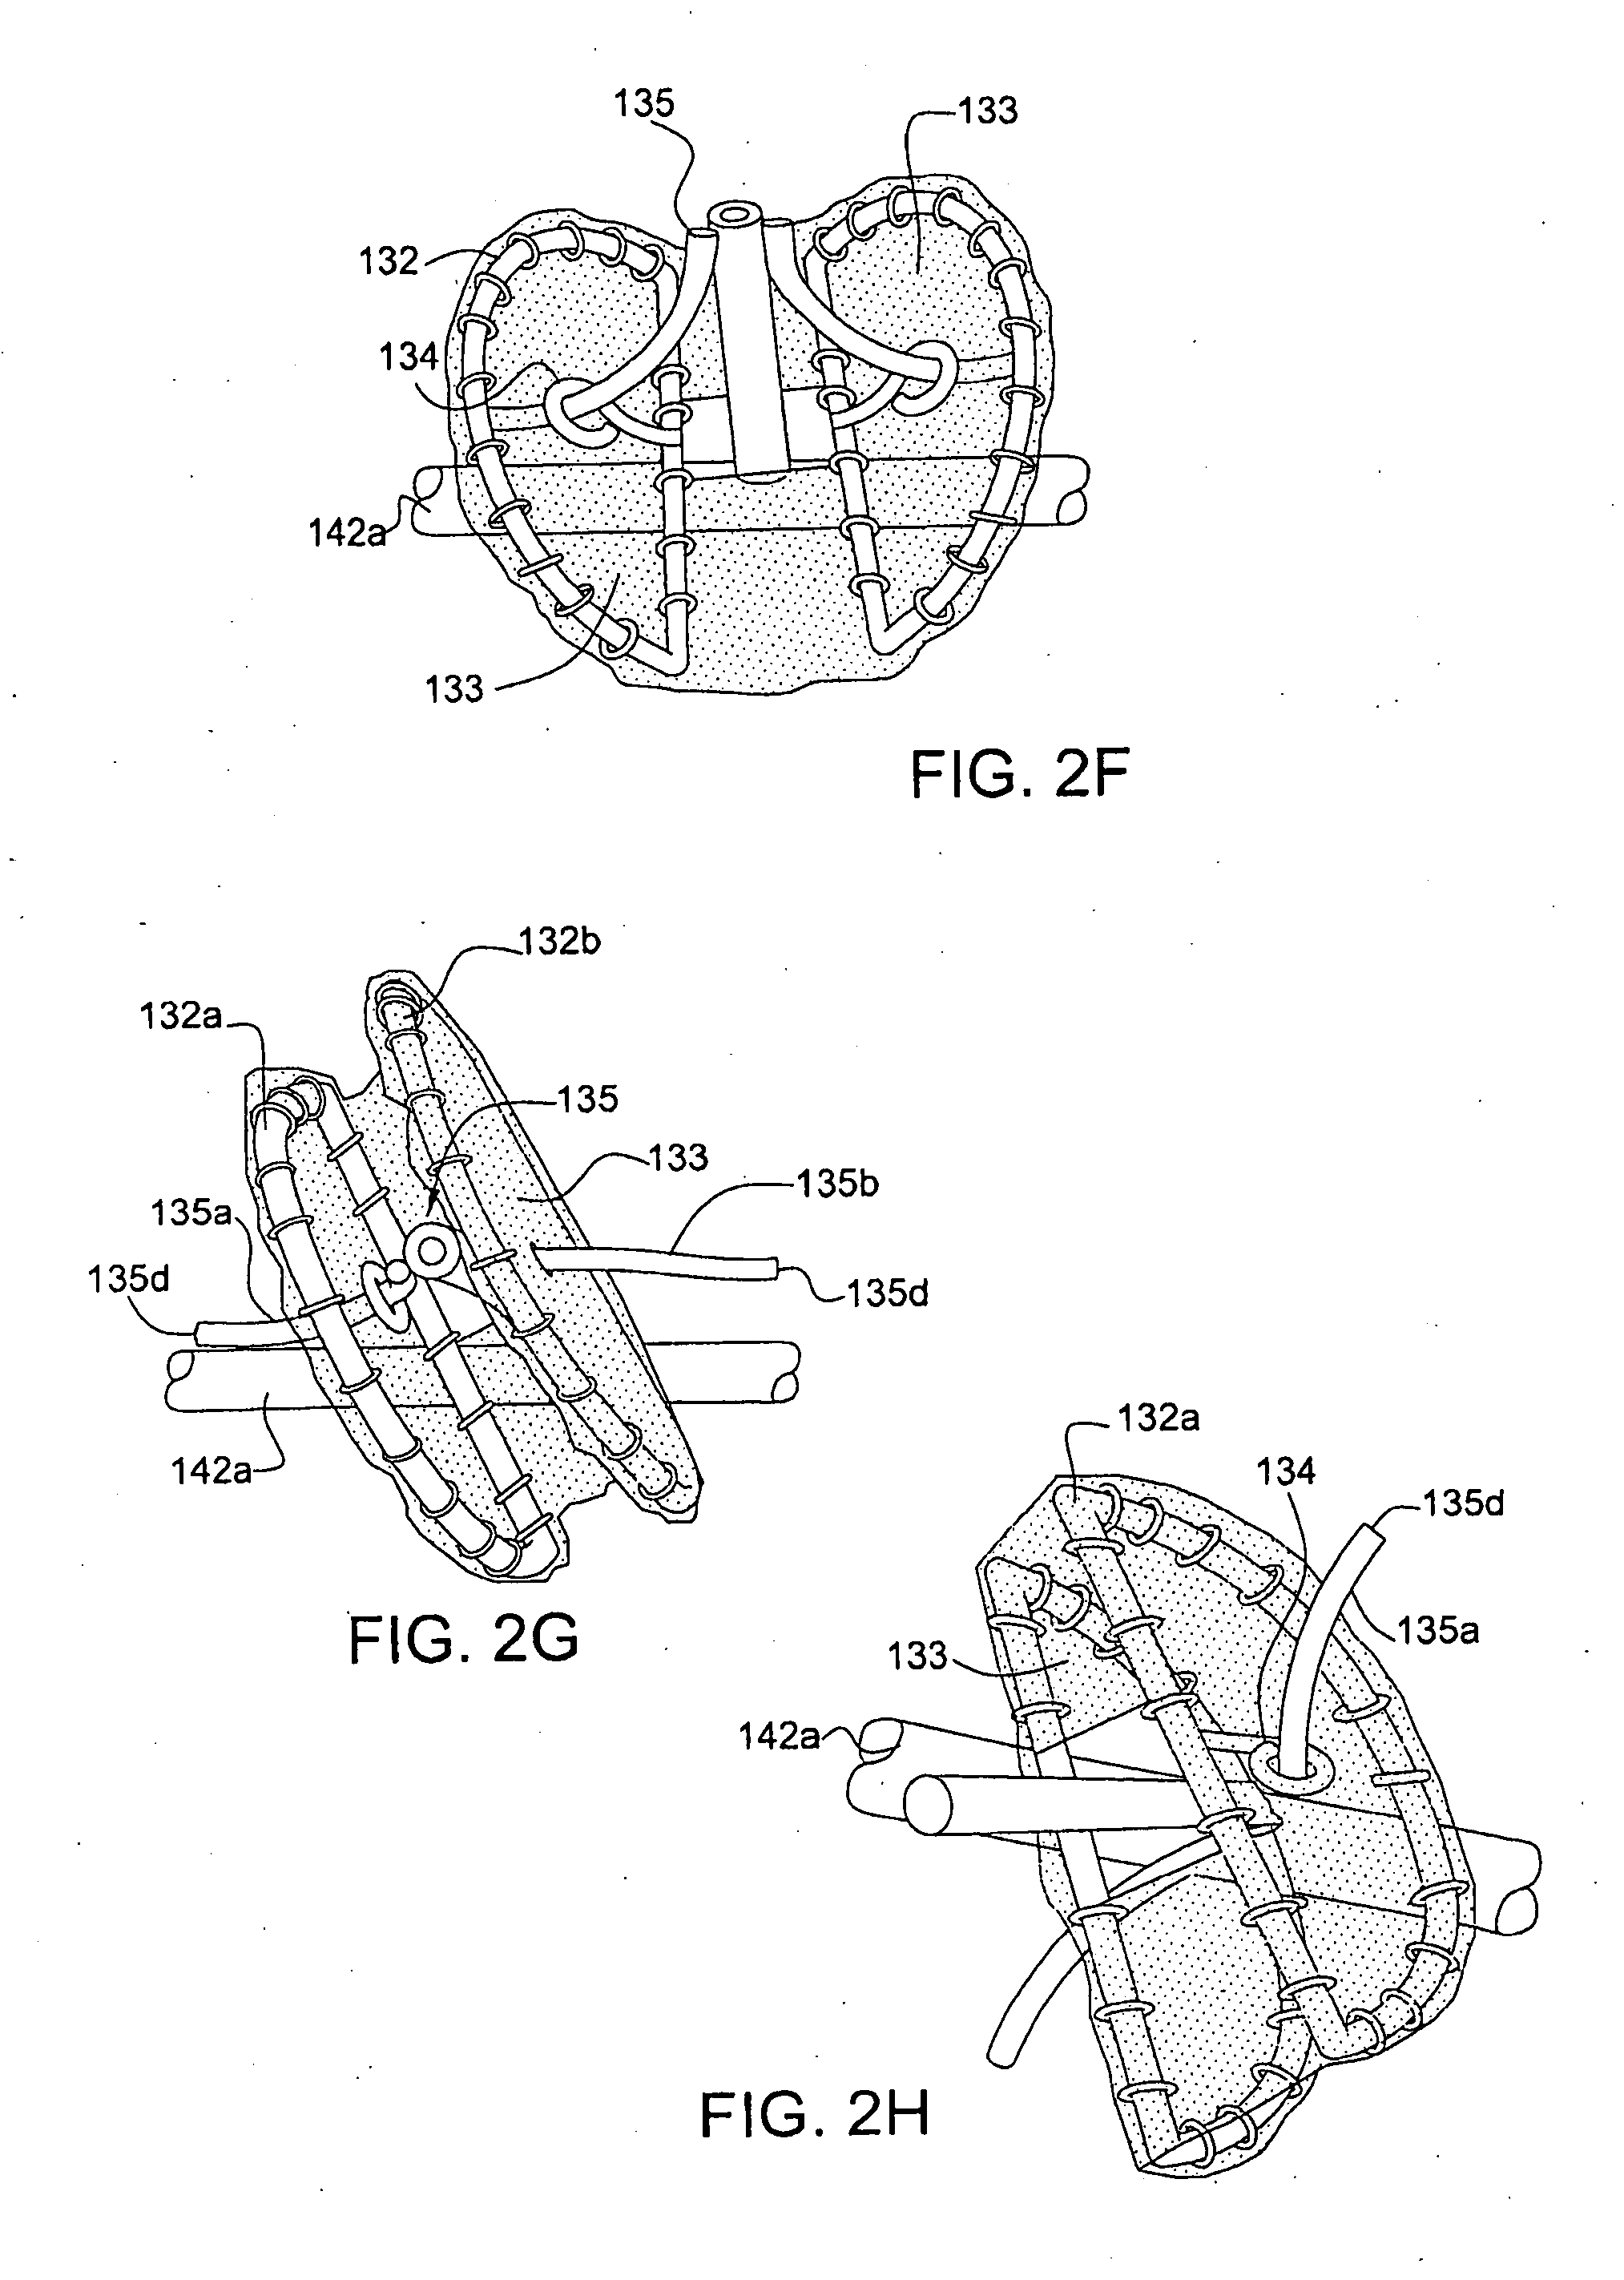 Percutaneous valve prosthesis and system and method for implanting same